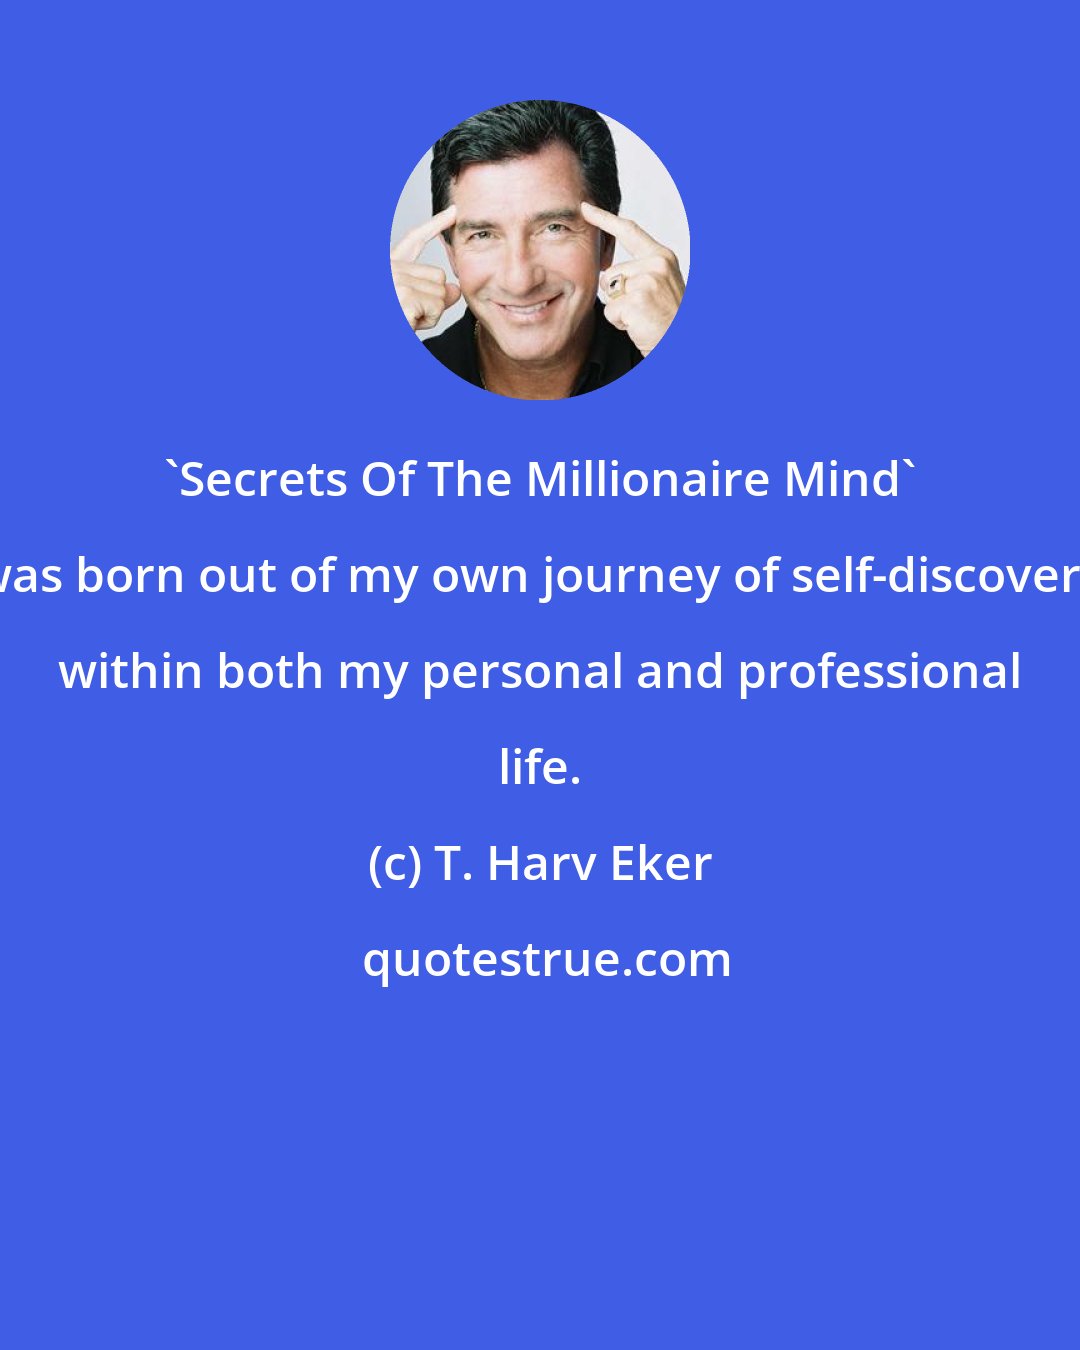 T. Harv Eker: 'Secrets Of The Millionaire Mind' was born out of my own journey of self-discovery within both my personal and professional life.